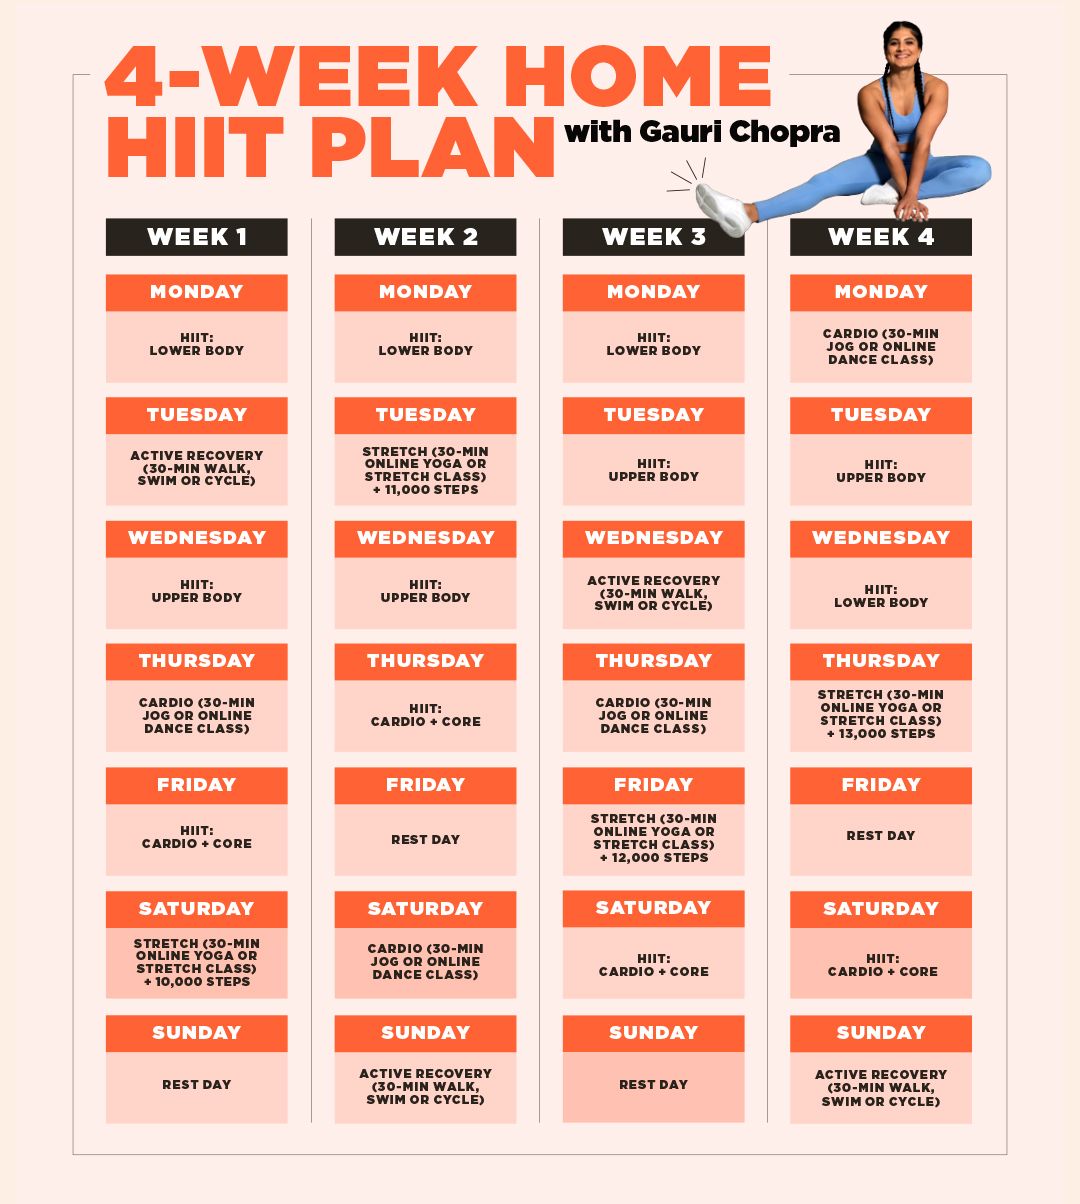 hiit workouts at home for weight loss